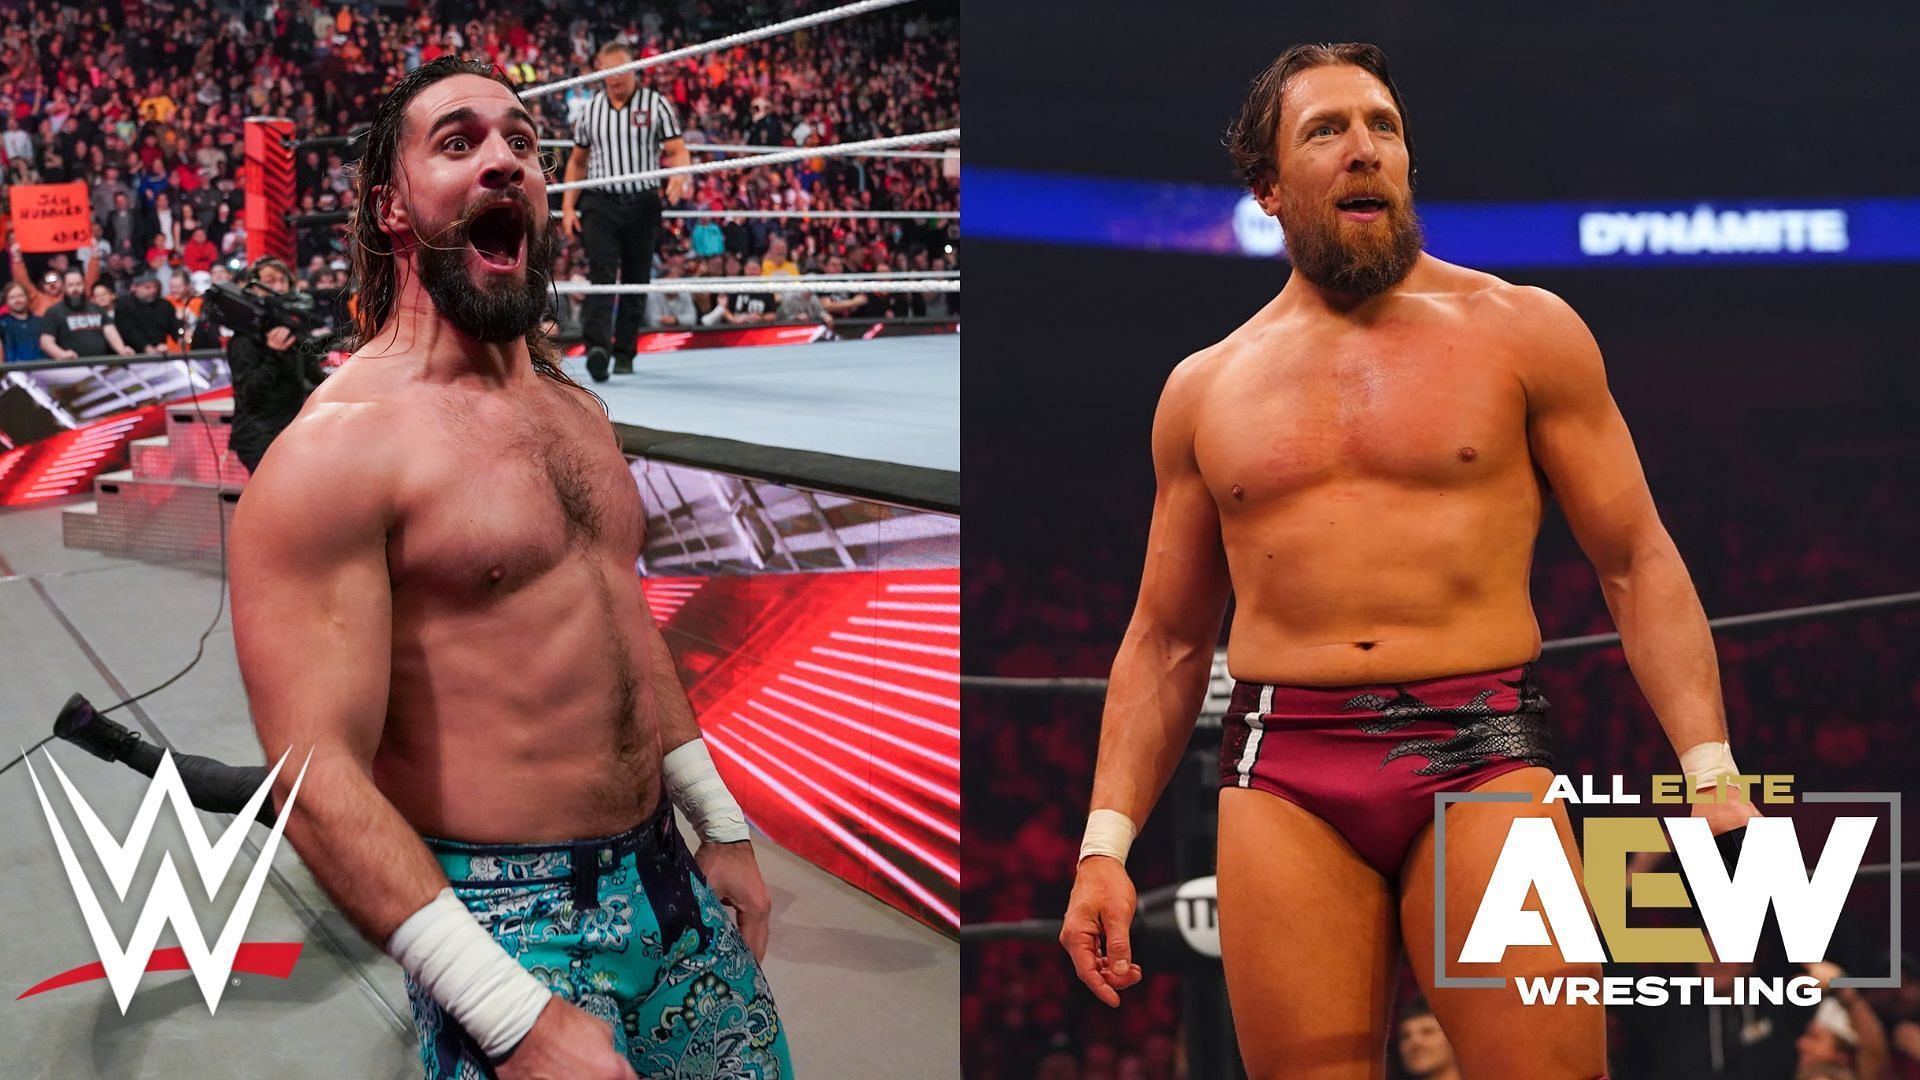 WWE Superstar Seth Rollins has faced these current AEW wrestlers in the past